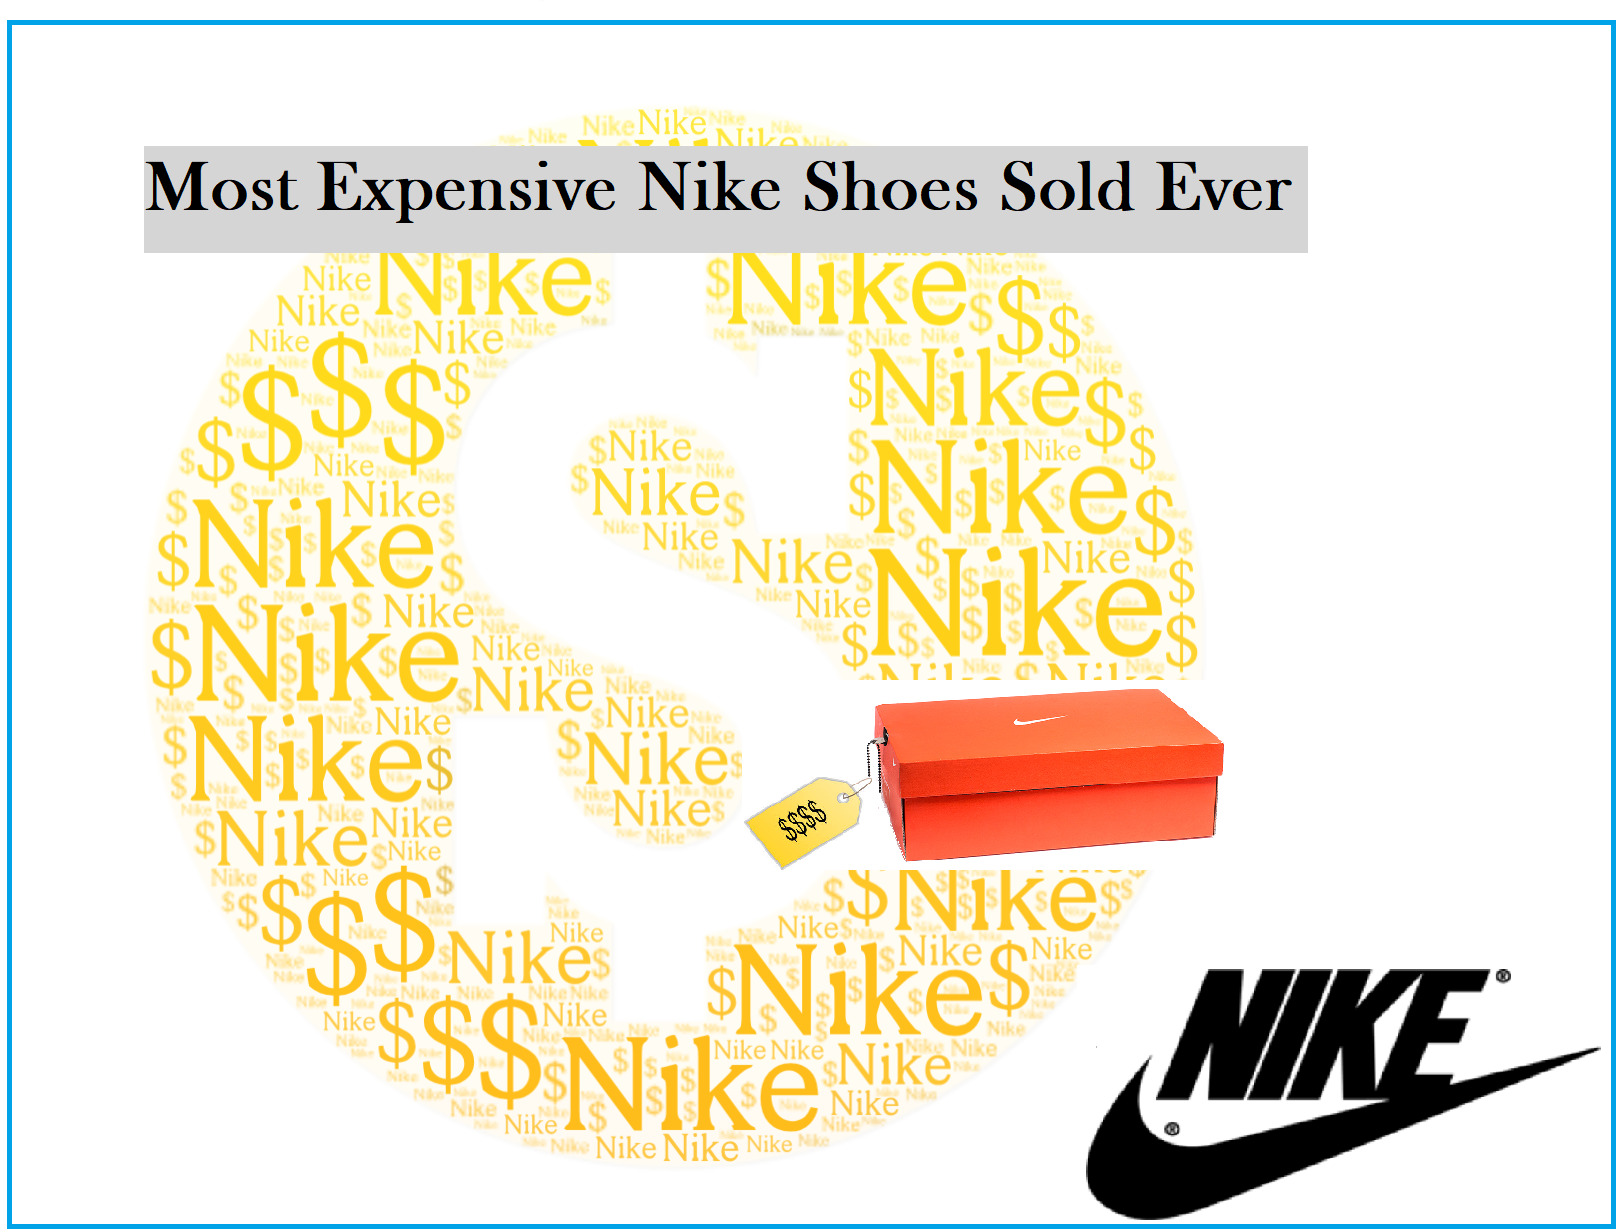 Most Expensive Nike Shoes